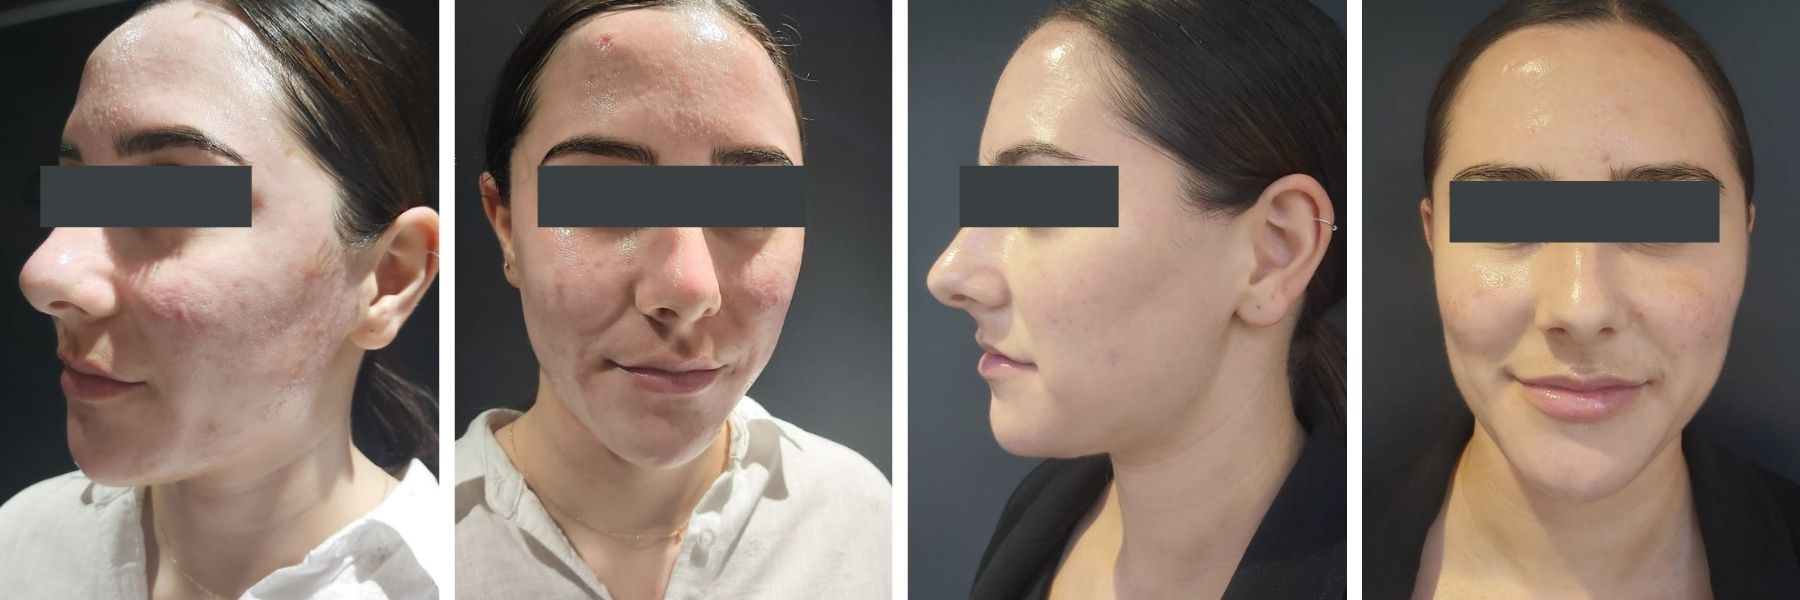 acne treatment before and after temple skincare & spa